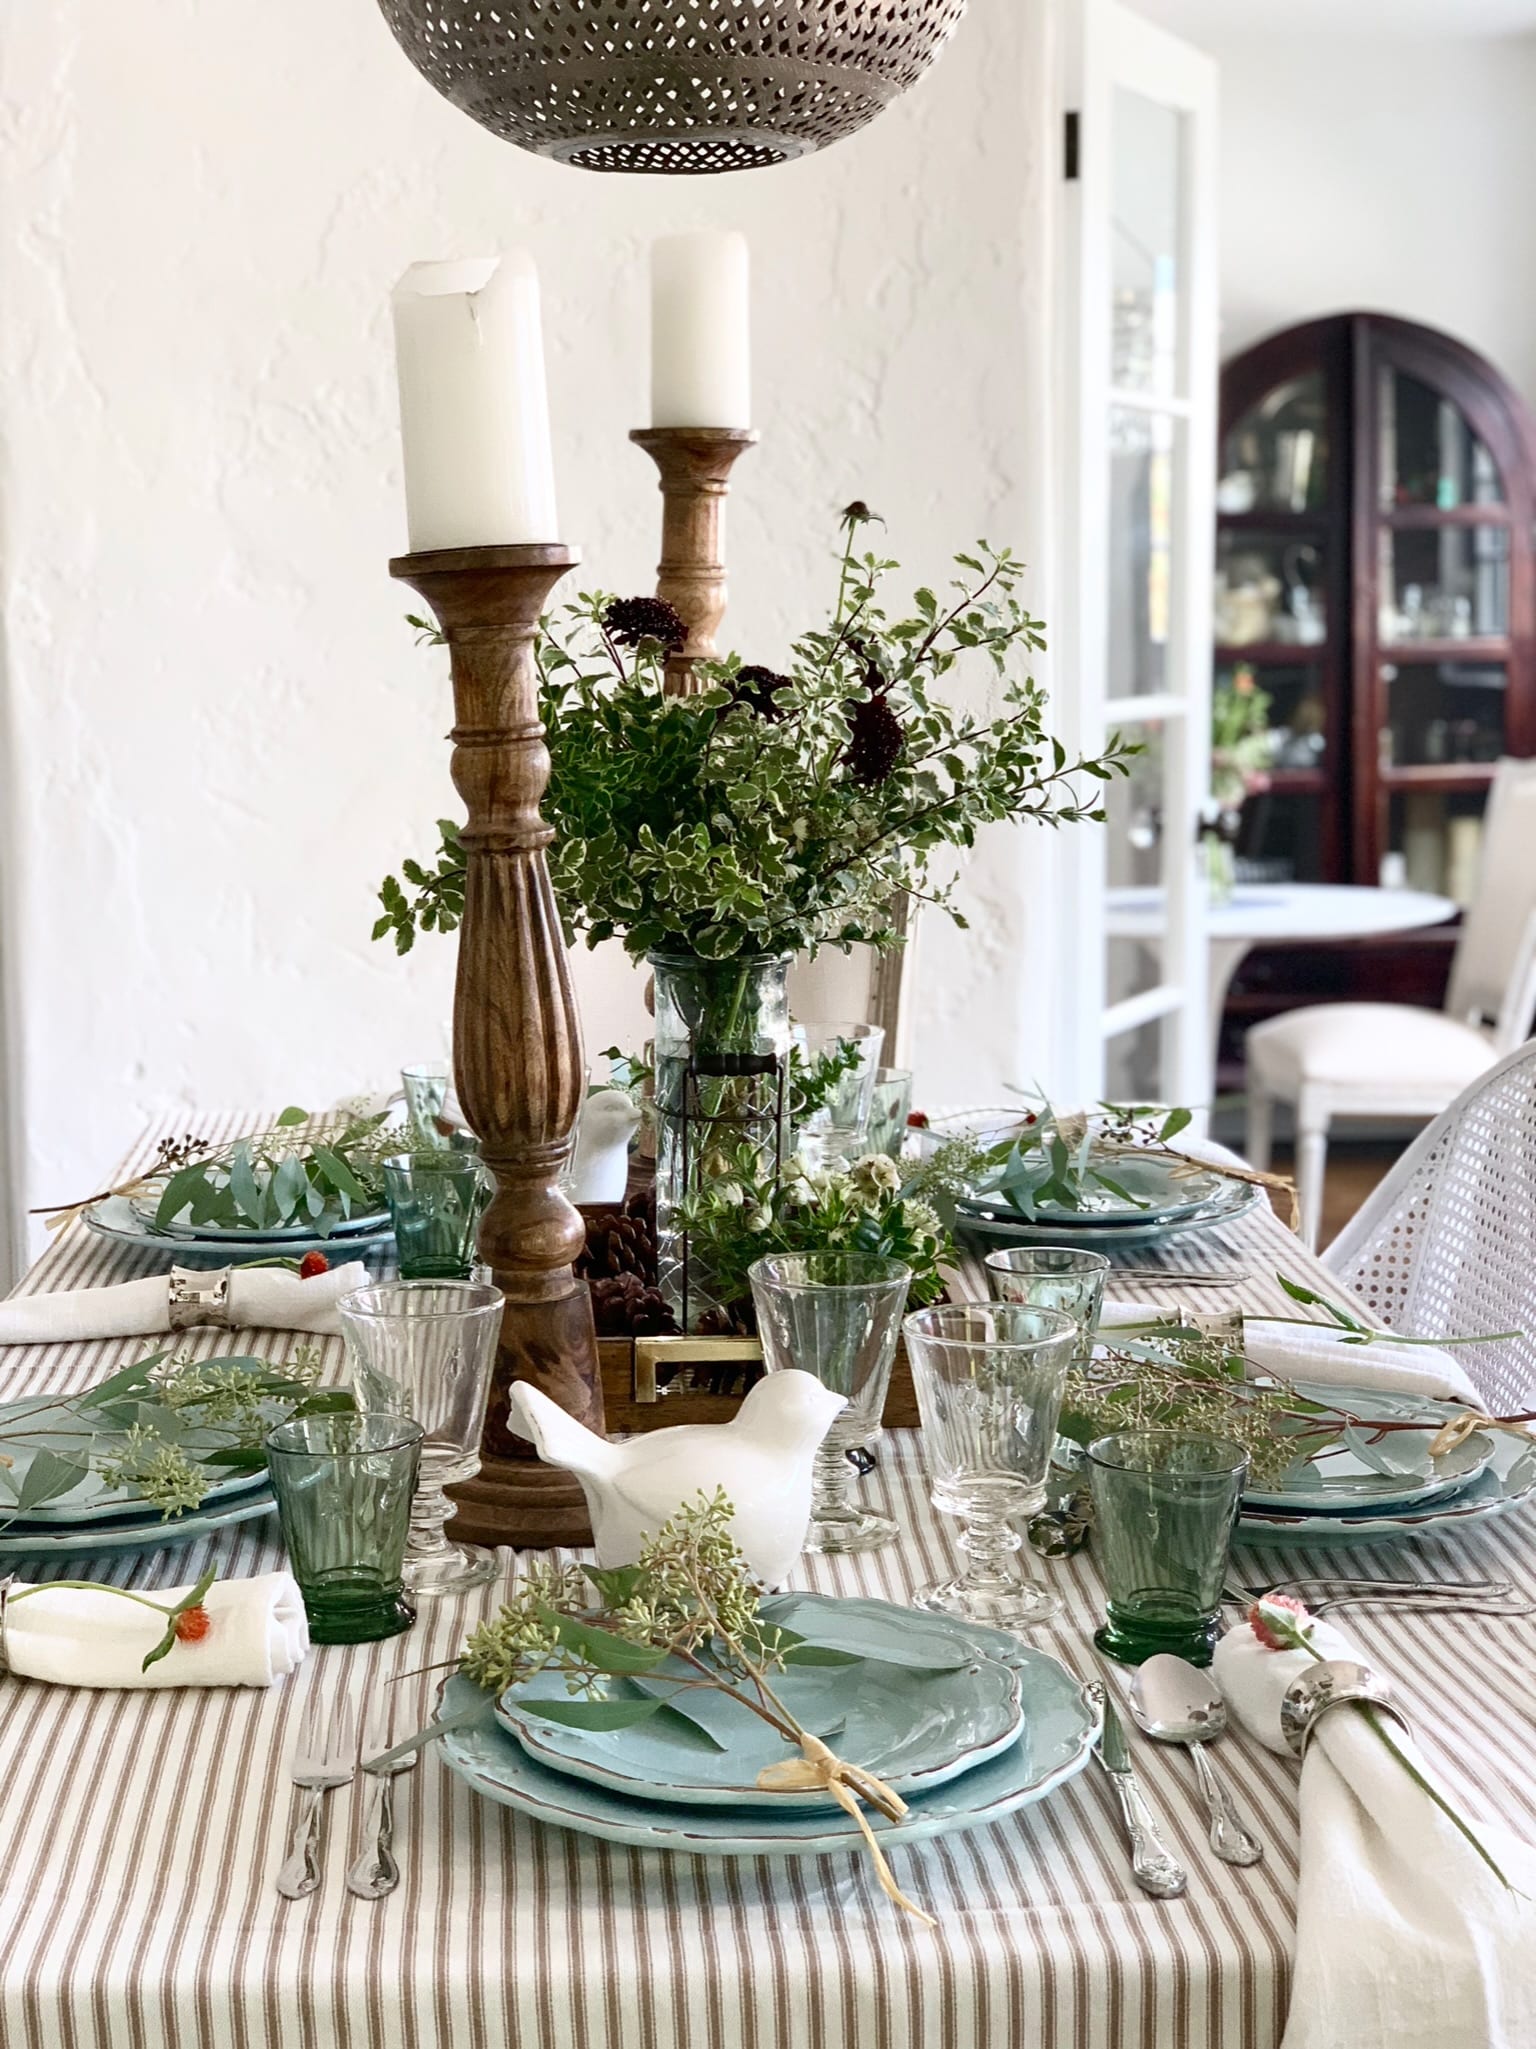 11 Affordable Table Decorations to Prep for the Holidays